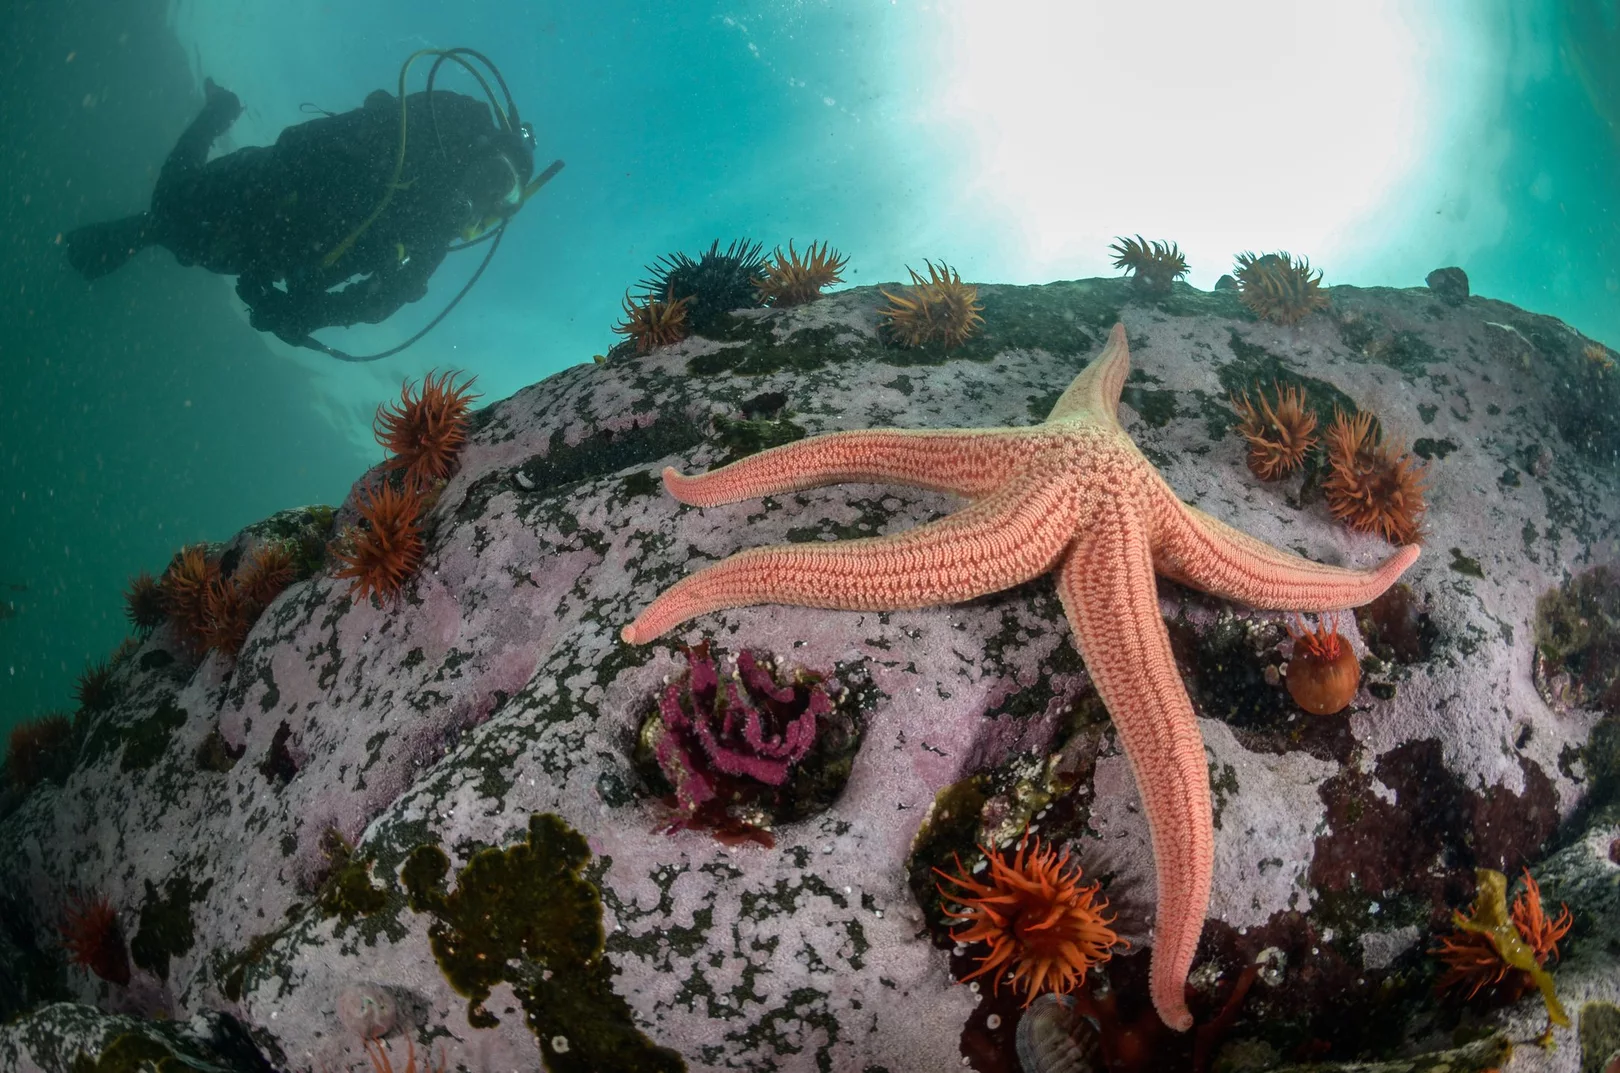 a scuba diver explores the chilly waters of Chile and spots a starfish